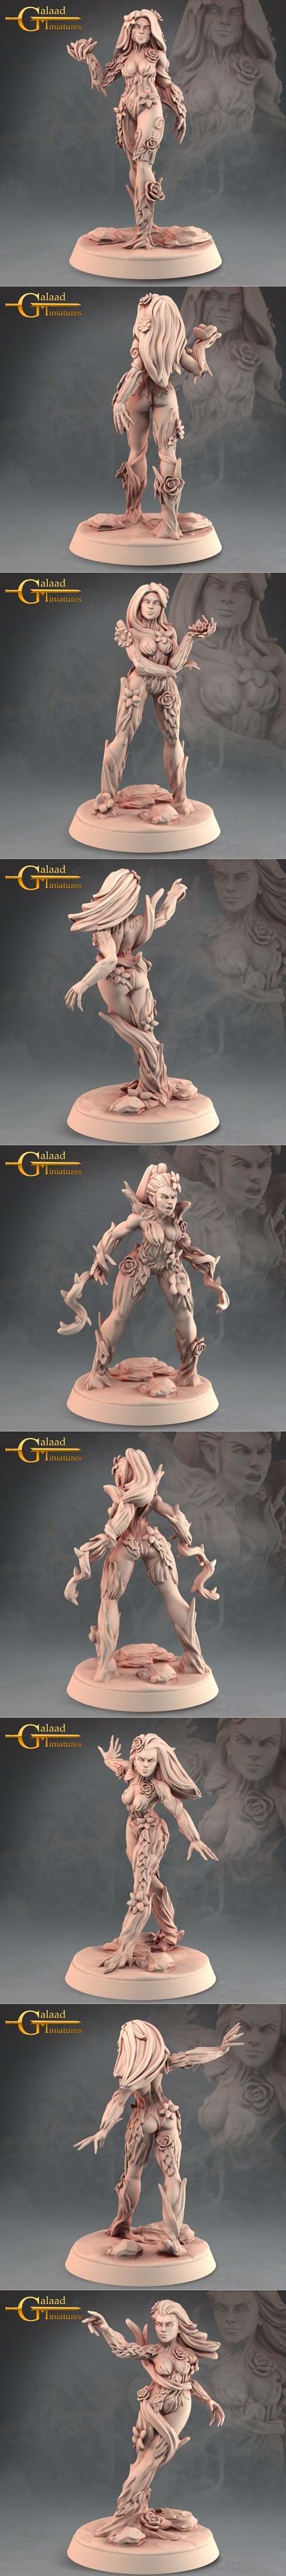 Into The Woods - Dryads – 3D Printable STL